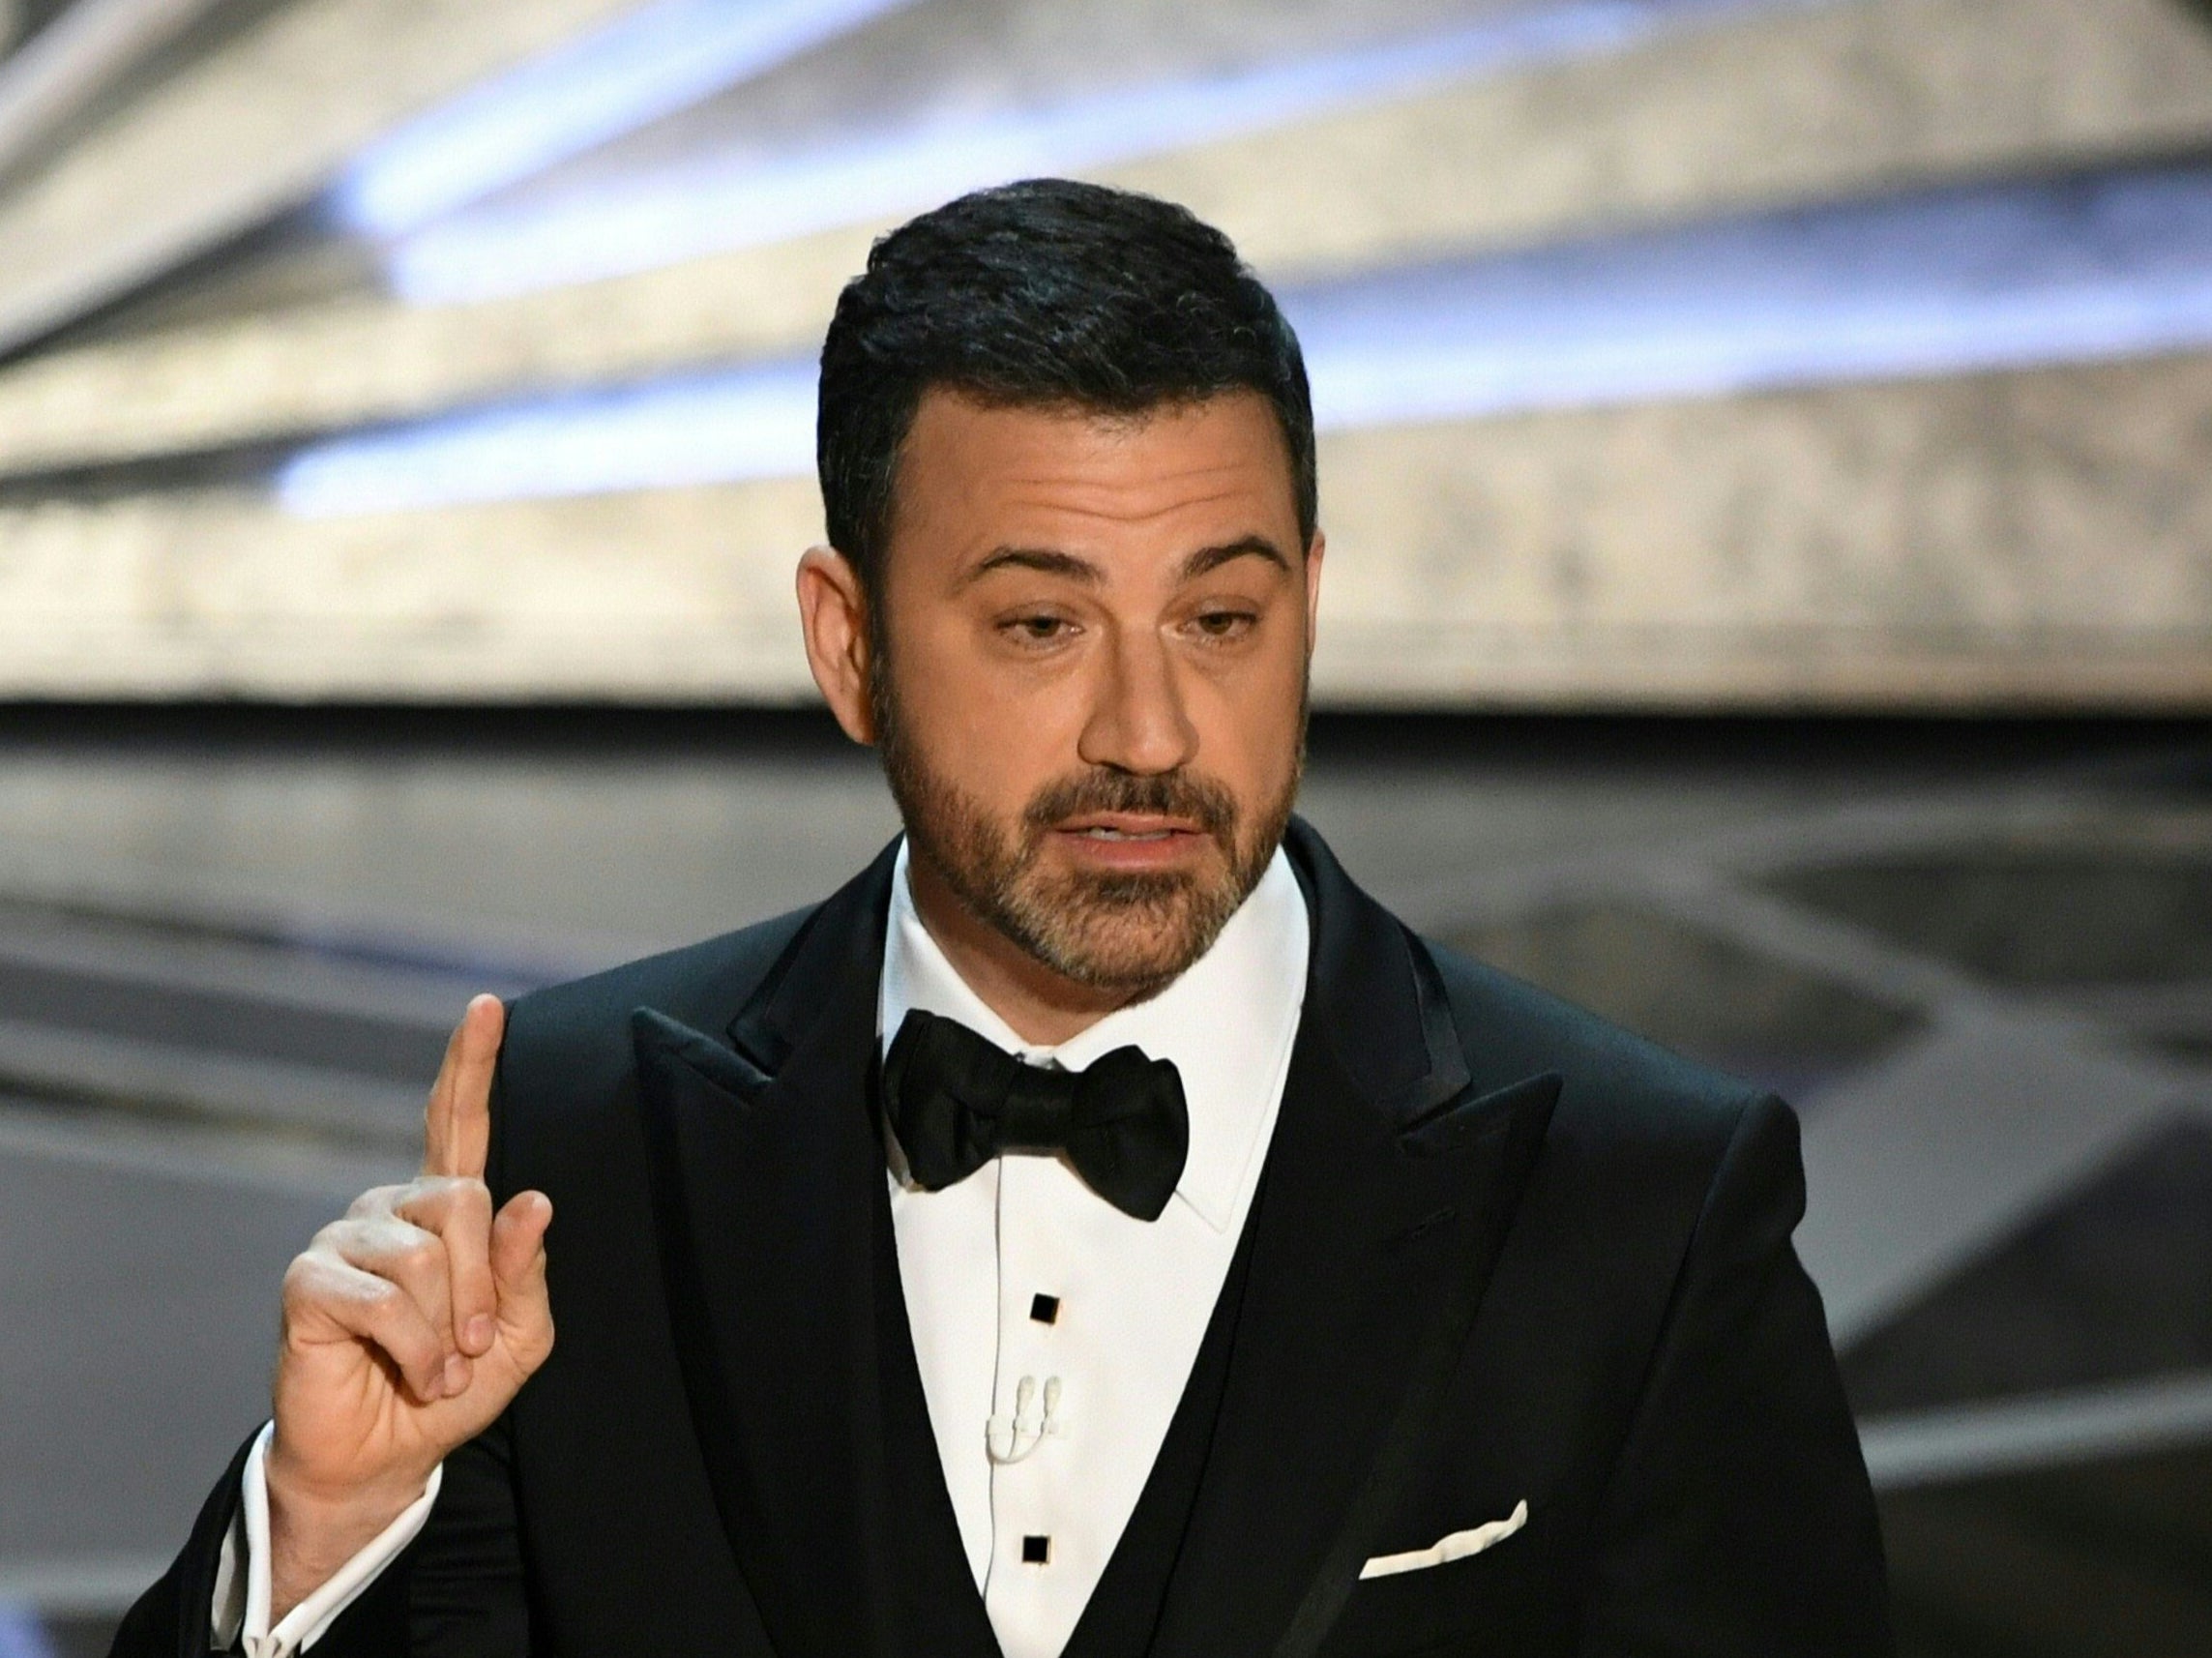 Jimmy Kimmel is set to host this year’s Oscars